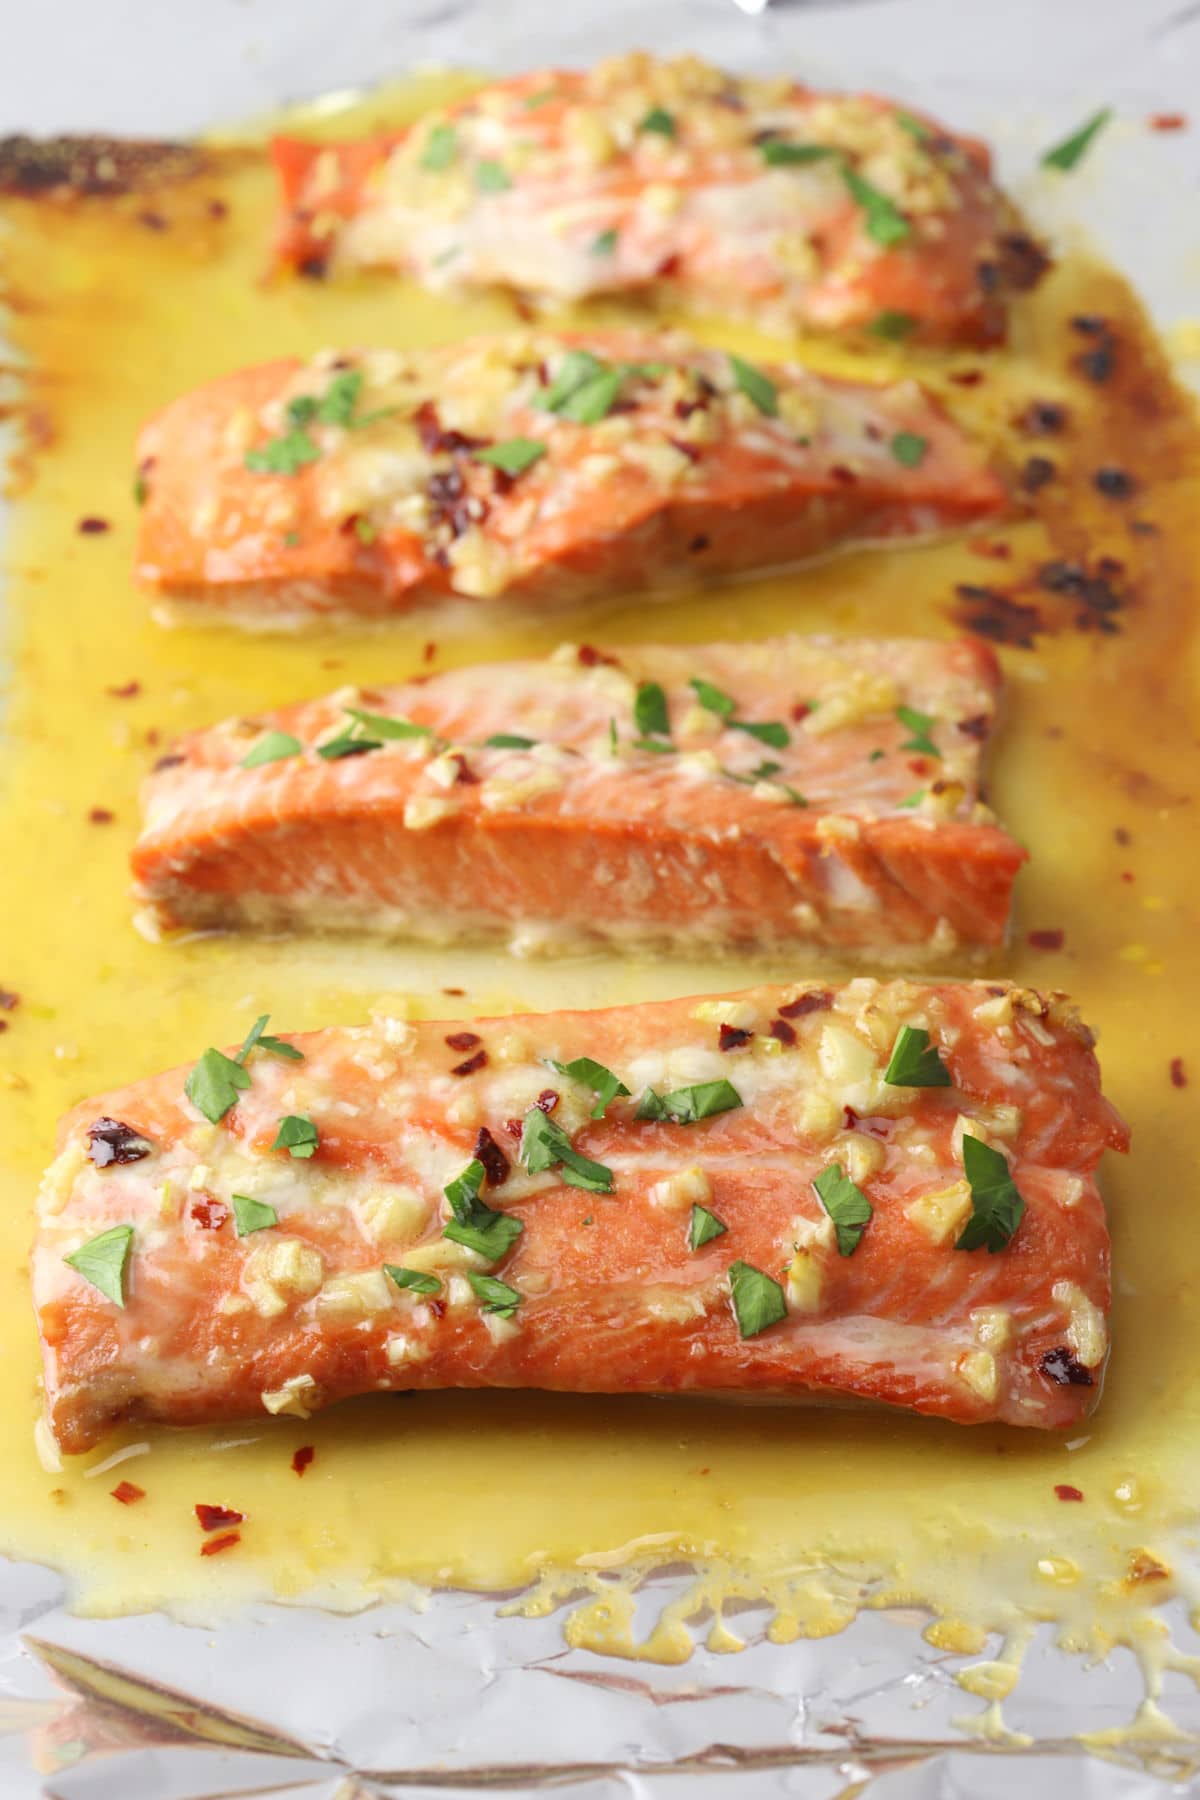 Salmon fillets topped with garlic and parsley sitting in butter sauce.